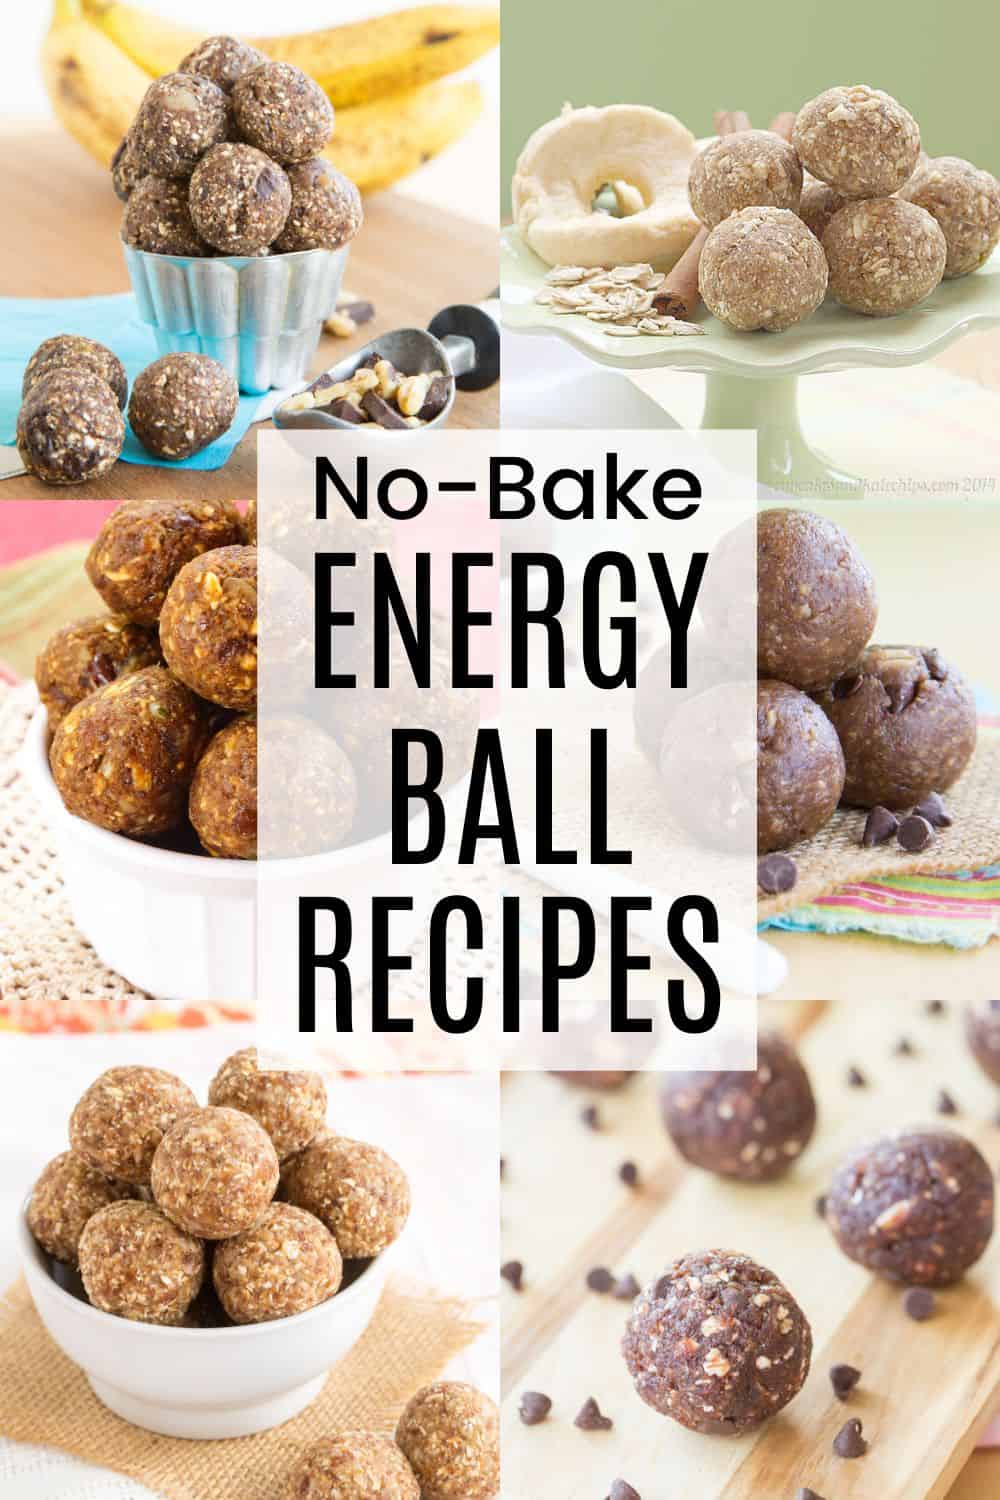 A two-by-three collage of different energy bites with a transparent white box in the middle with text overlay that says "No-Bake Energy Balls Recipes".